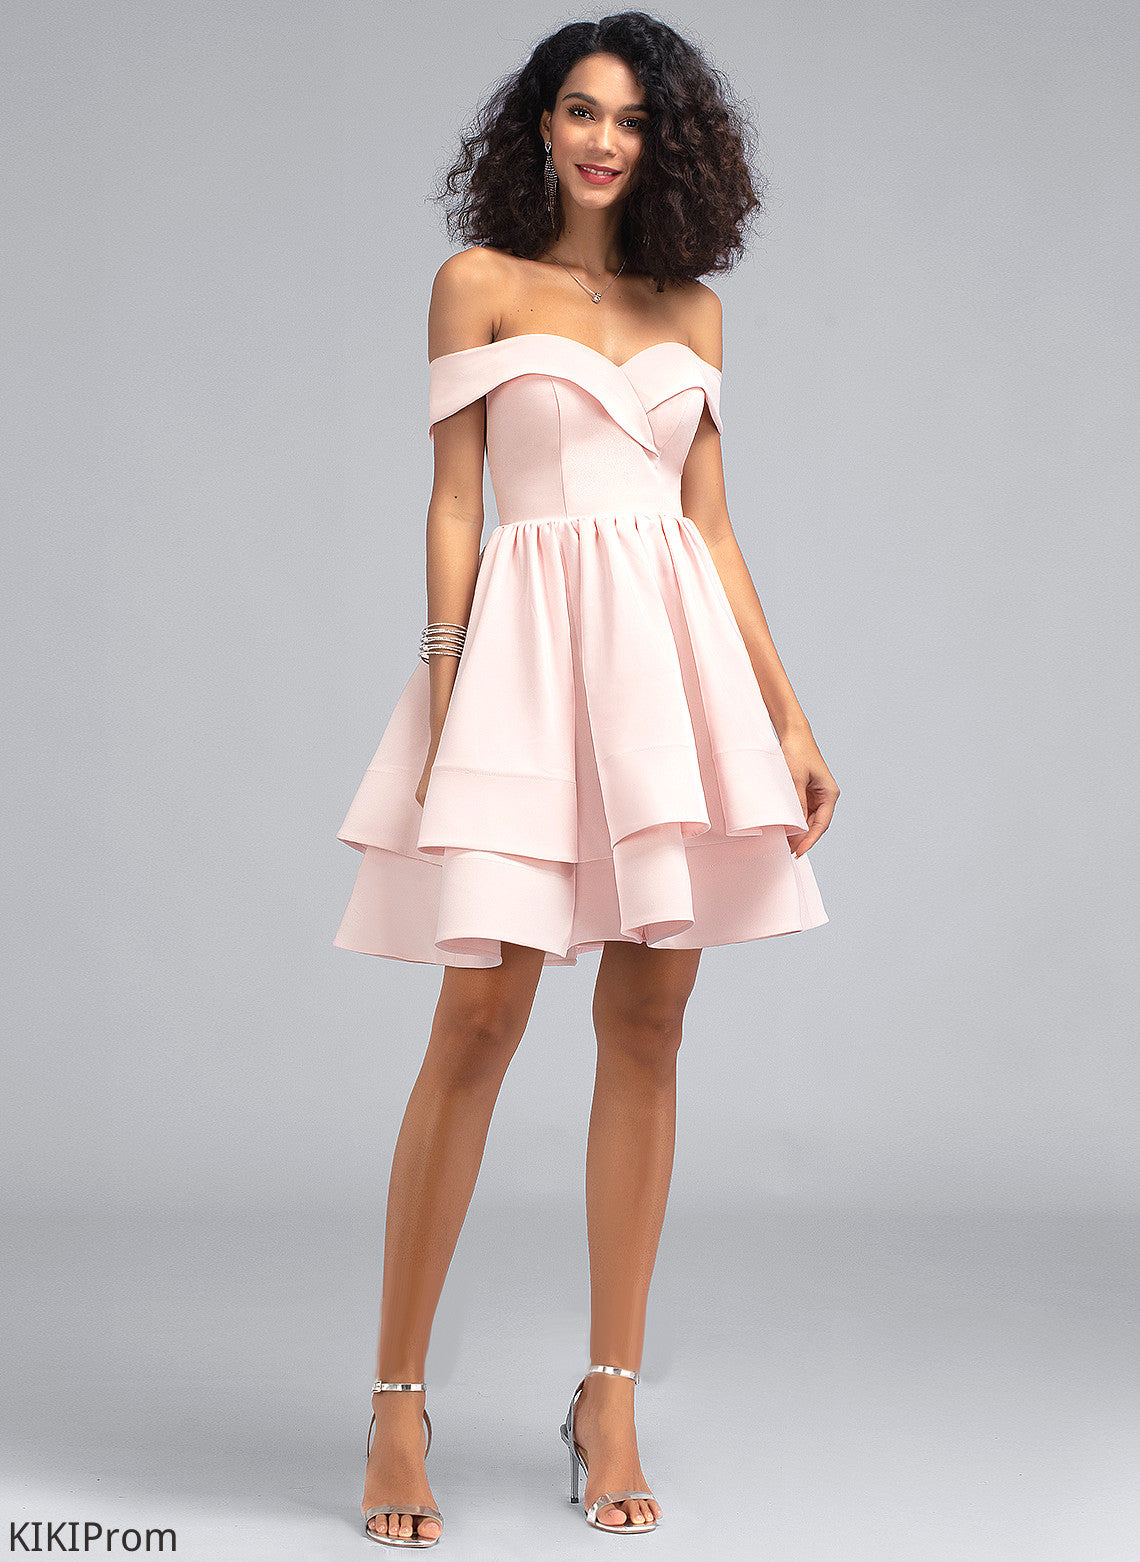 With Crepe Ruffles Short/Mini A-Line Cascading Homecoming Dresses Dress Homecoming Kamryn Stretch Off-the-Shoulder